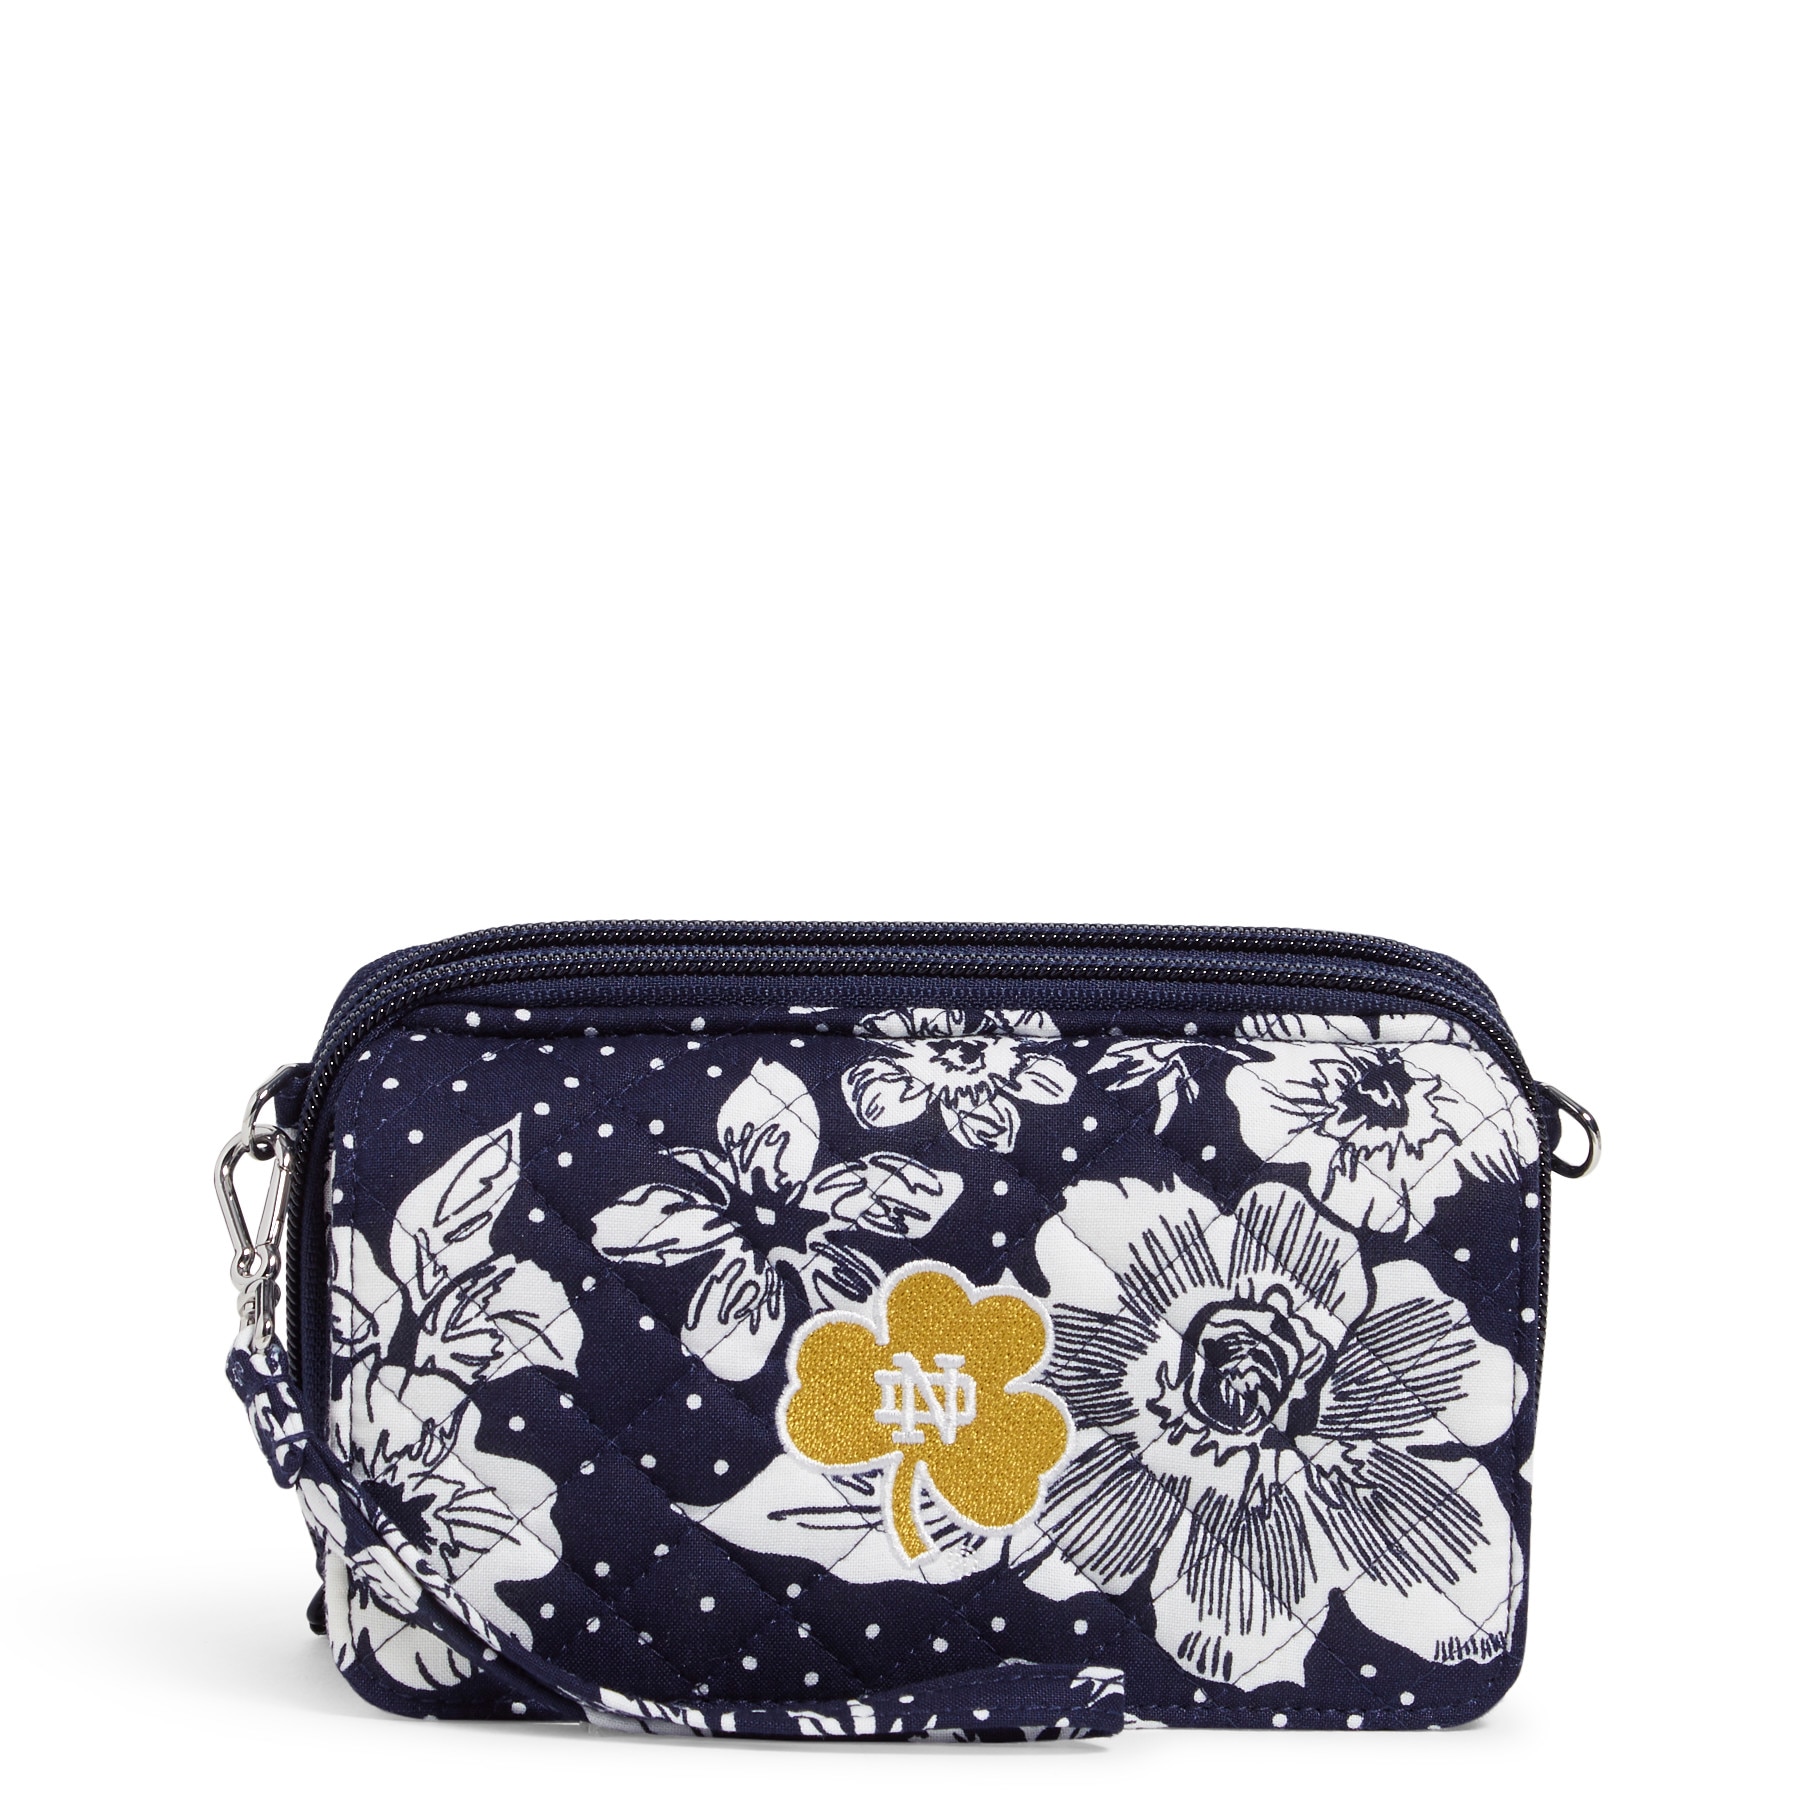 Notre Dame RFID All in One Crossbody